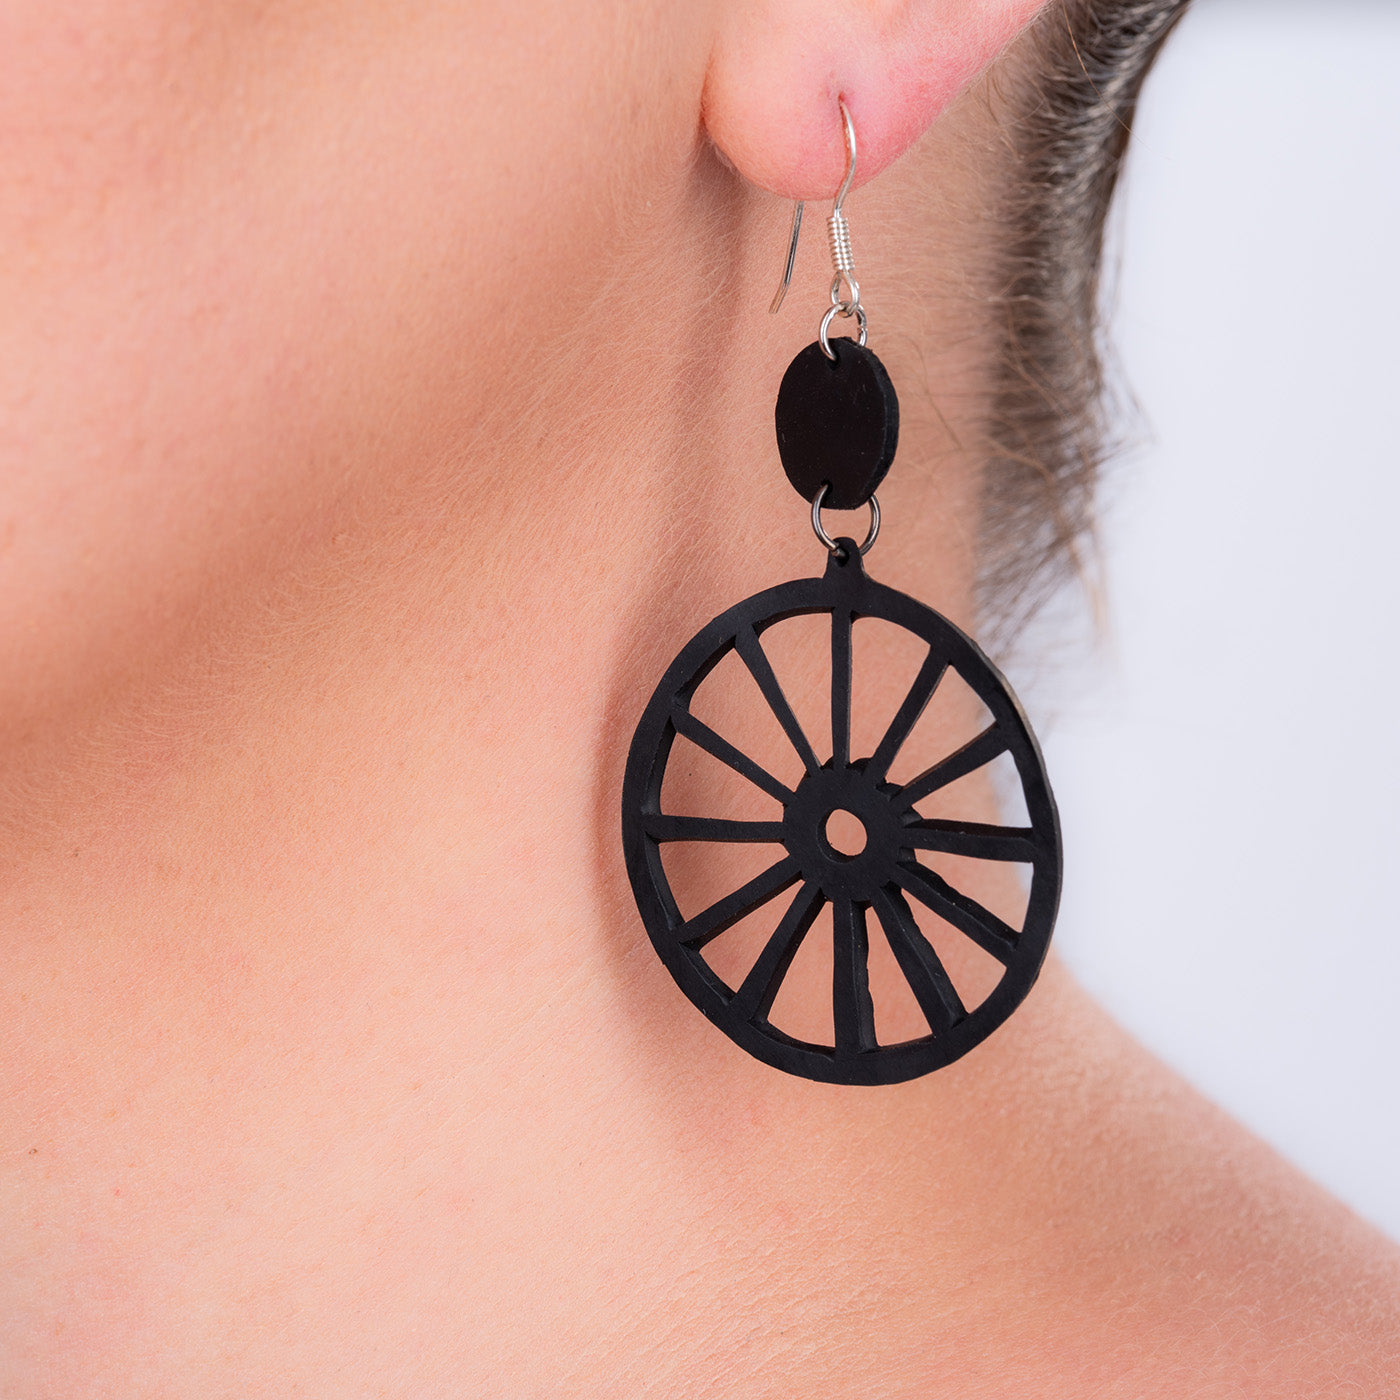 Water Wheel Upcycled Rubber Earrings by Paguro Upcycle